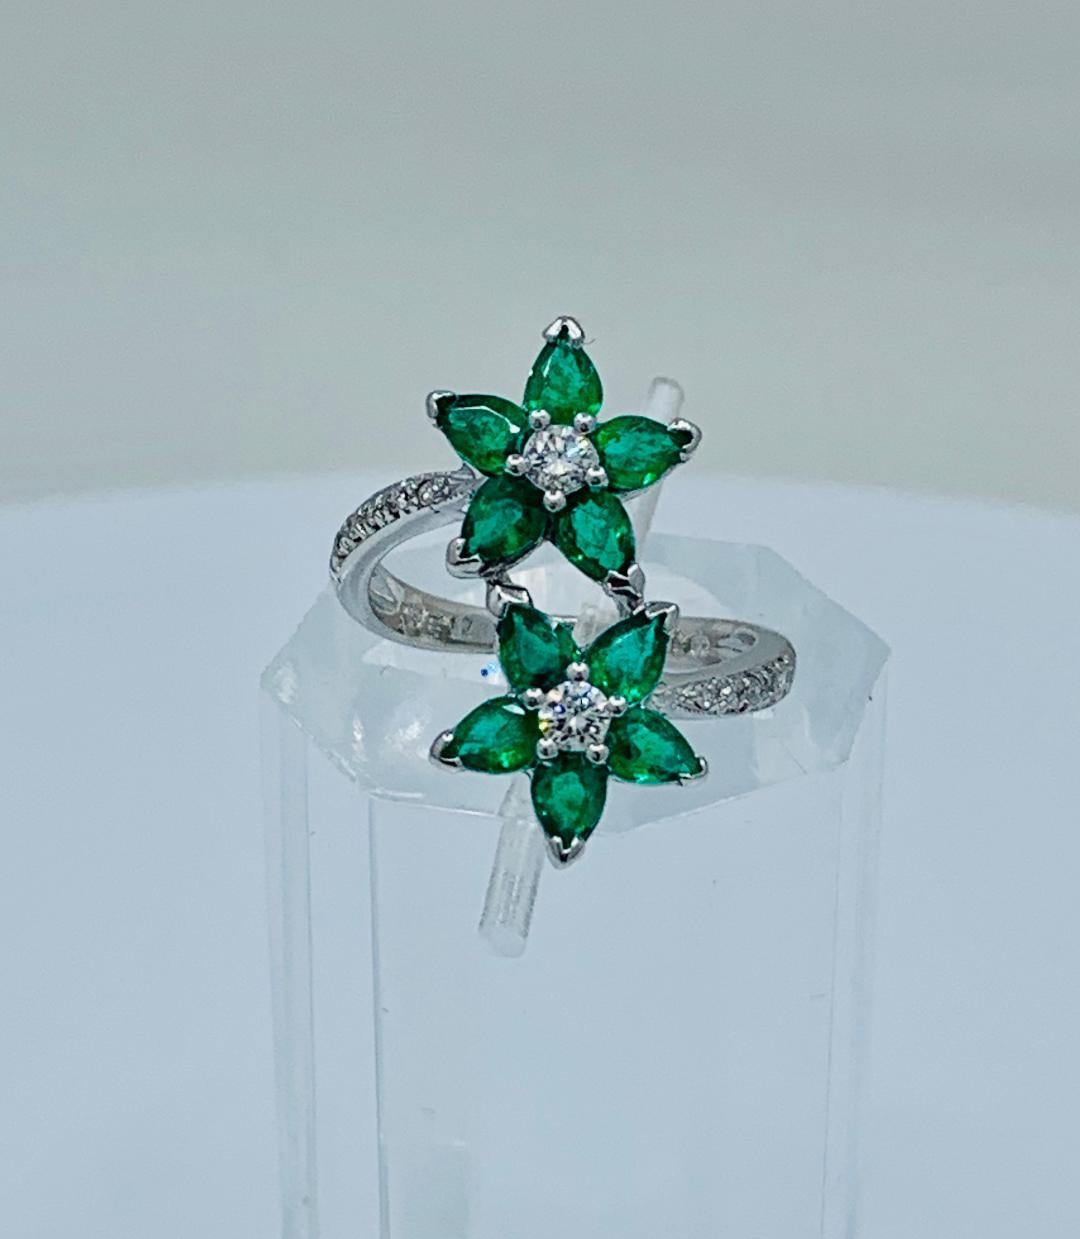 Very feminine custom made estate wrap-around ring features prong set, pear cut emerald petals which form a pair of flowers accented with round brilliant white diamond centers. Diamond pave stems run half way down the shank of the ring on both